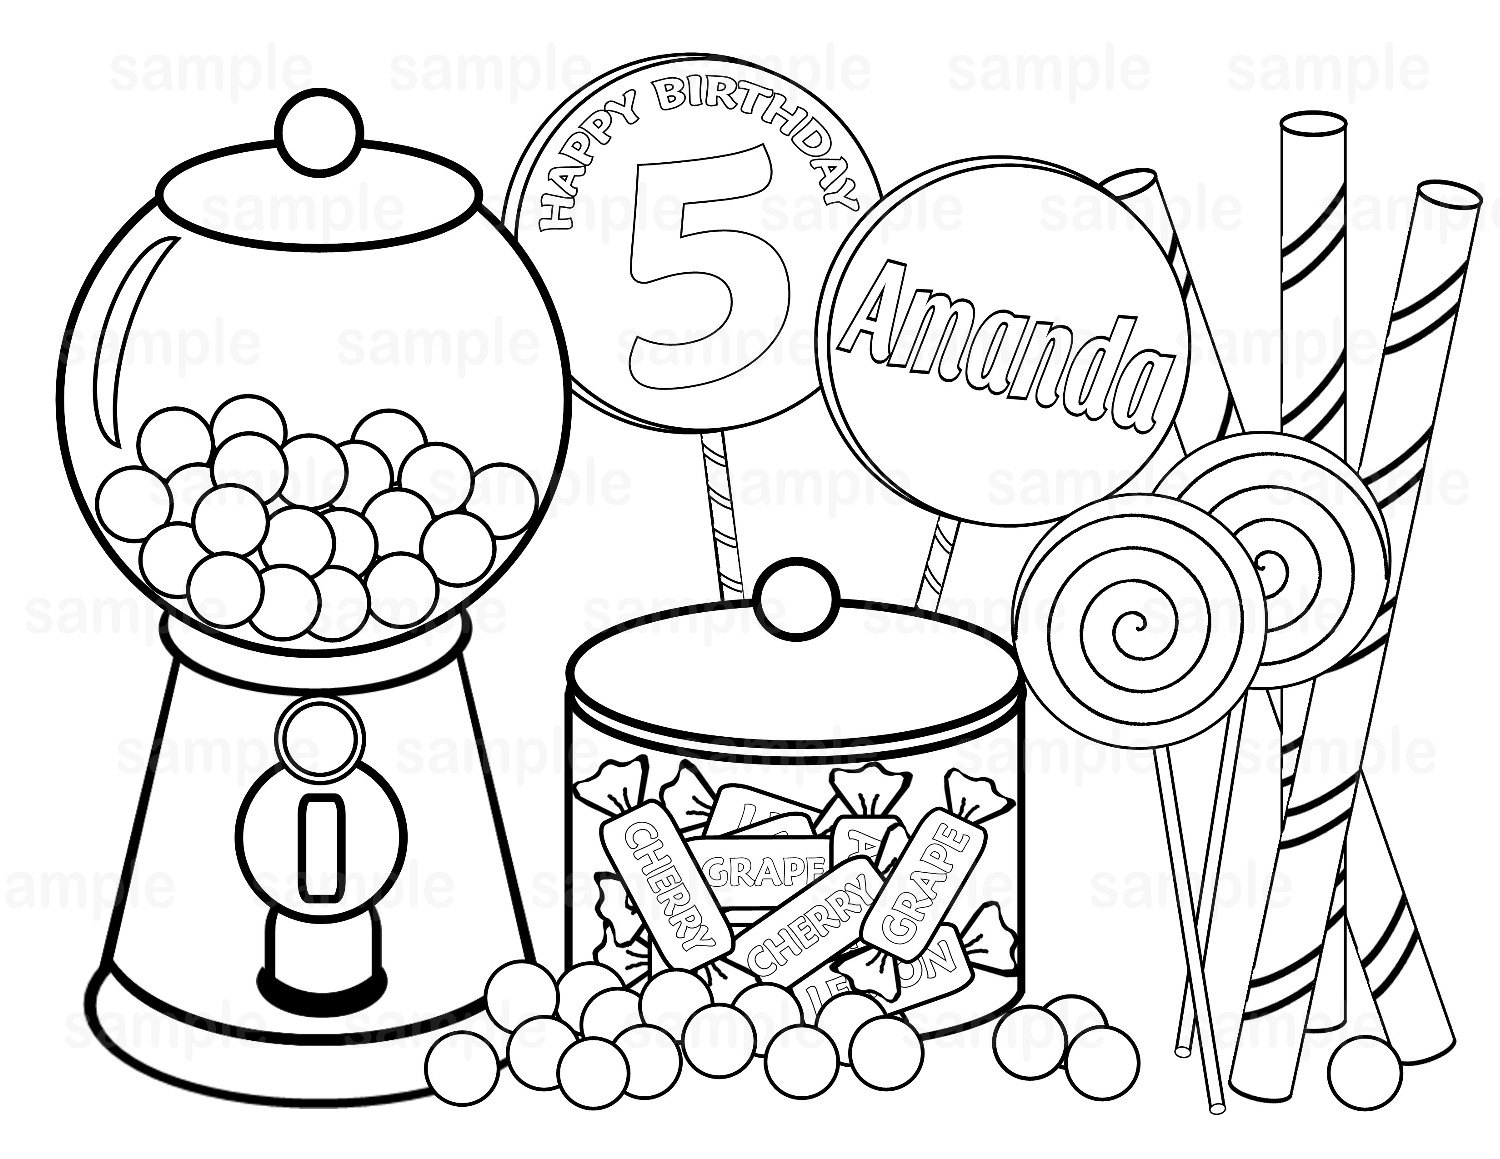 Lollipop Coloring Page Candy Coloring Pages Bestofcoloringcom Lollipop Coloring Page